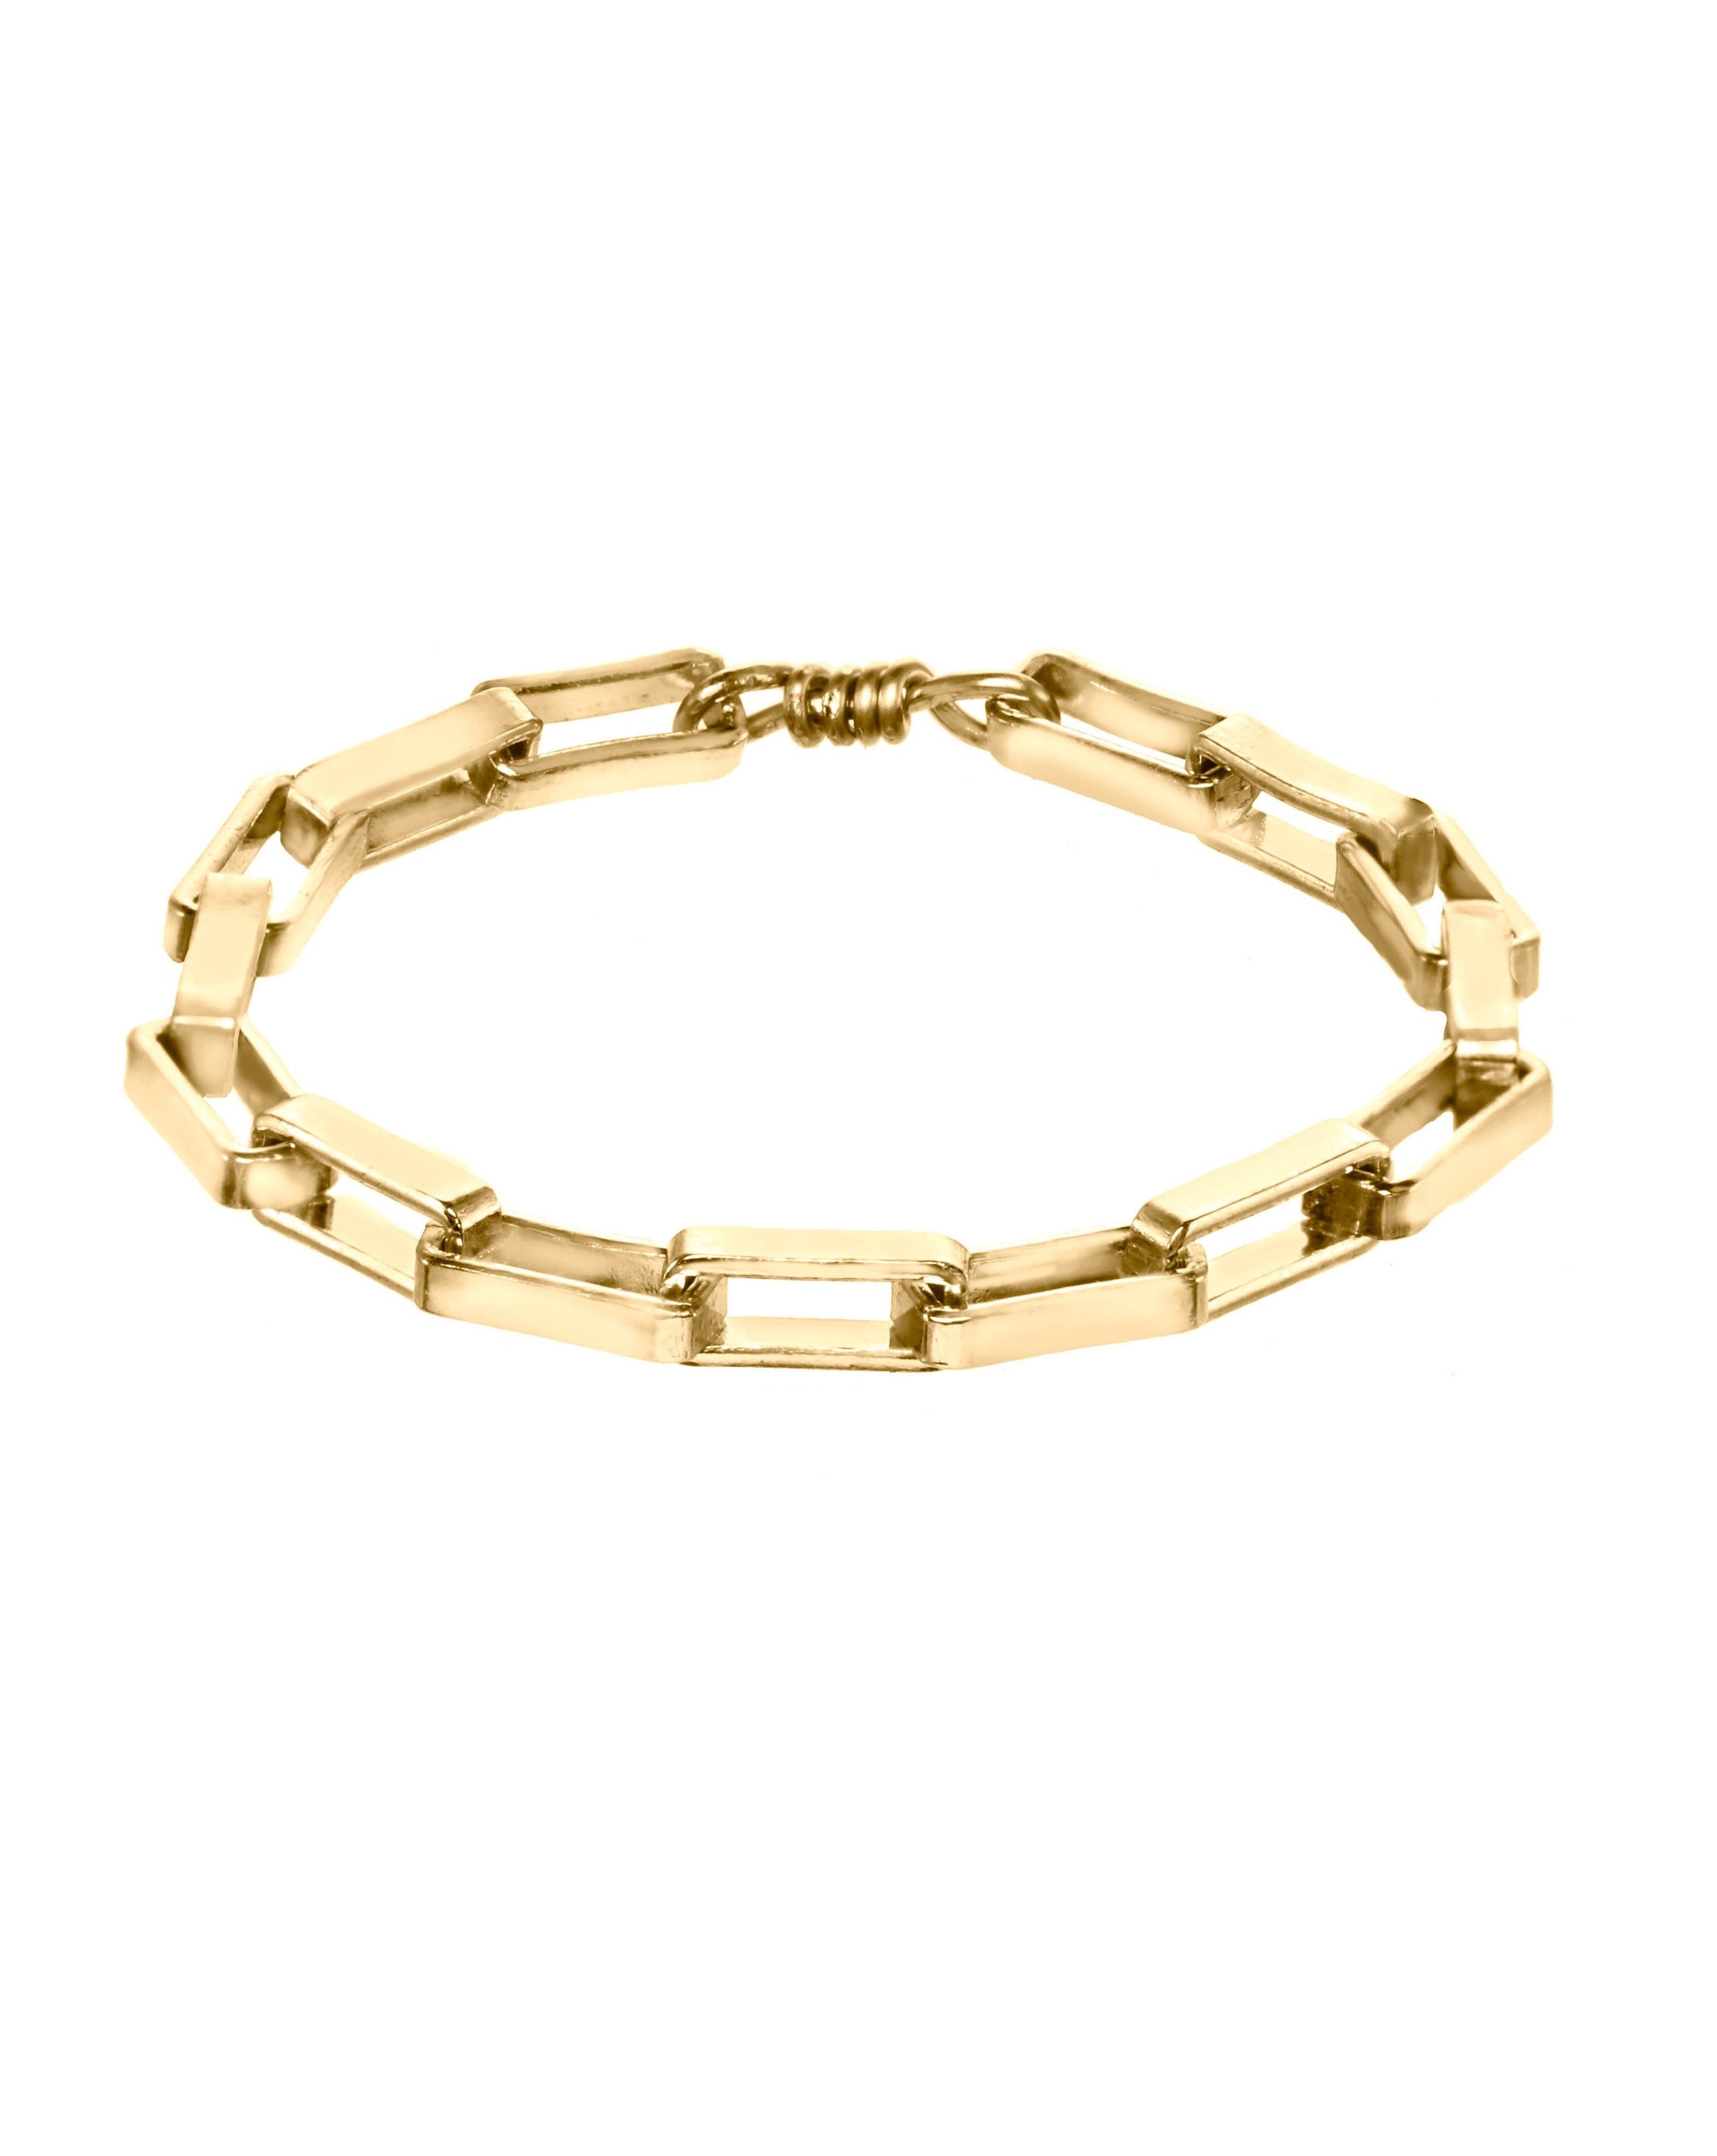 Link Chain Ring by KOZAKH. A soft link chain ring crafted in 14K Gold Filled.